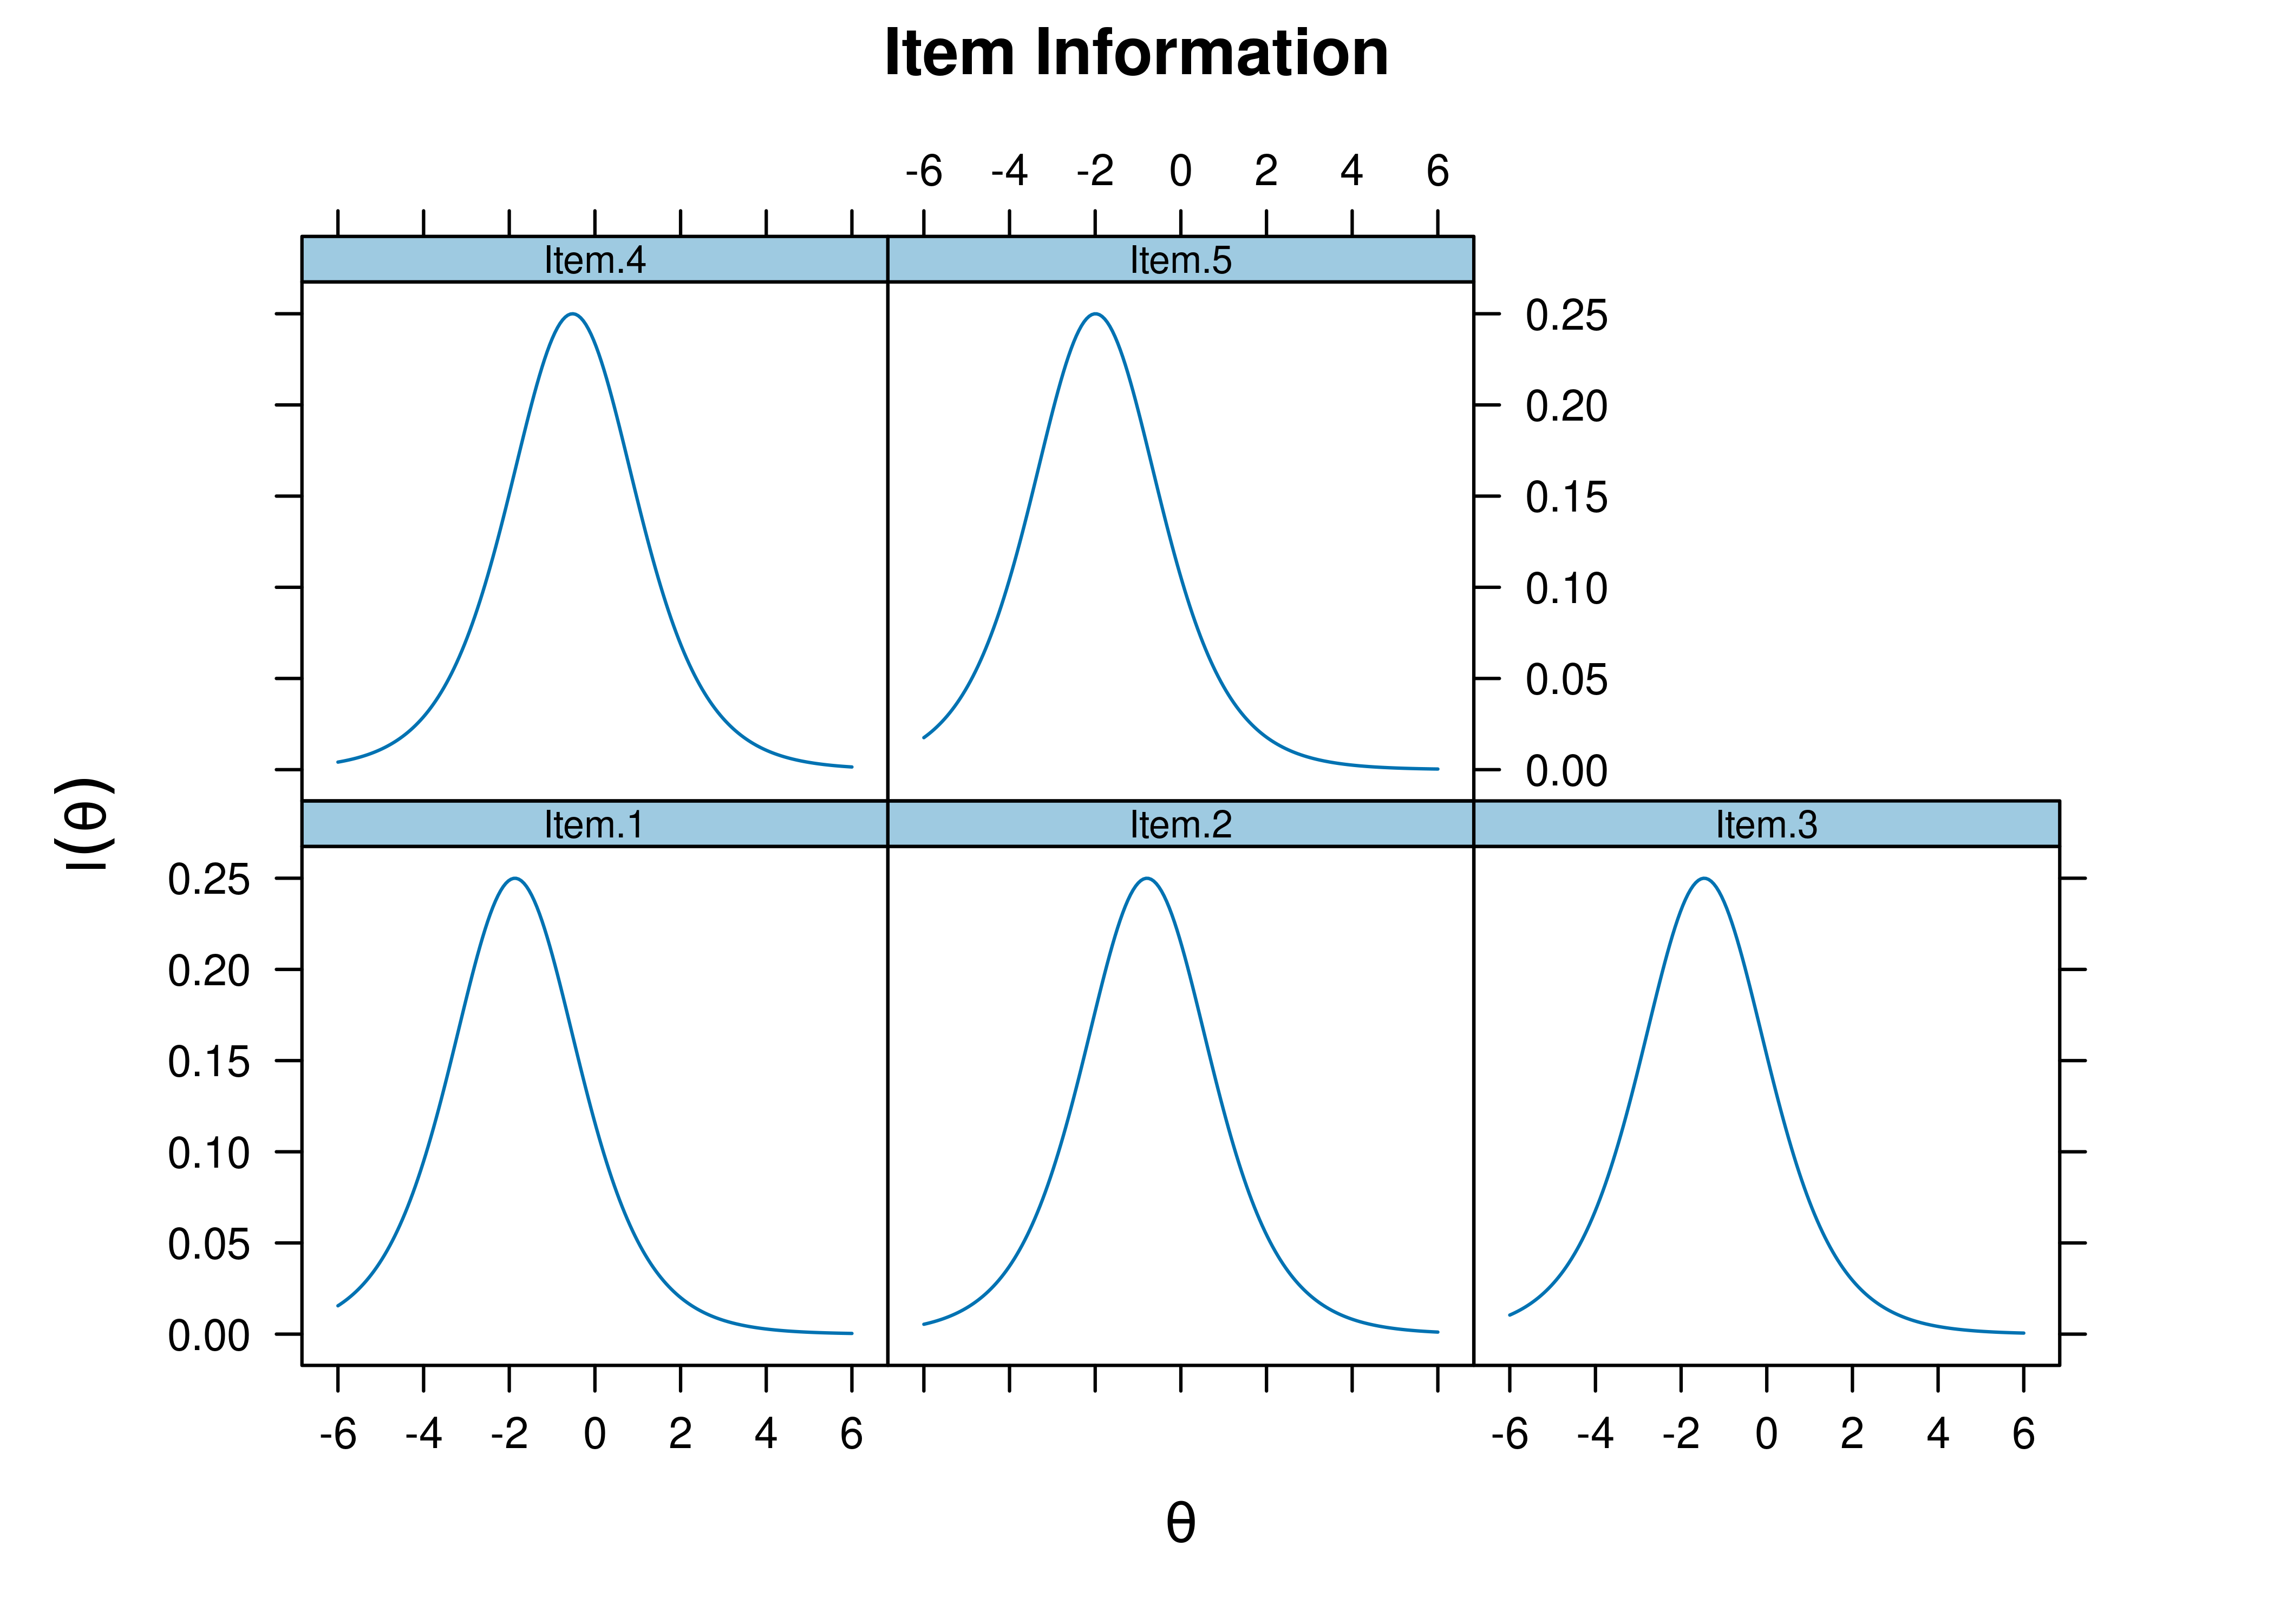 Item Information Curves from Rasch Item Response Theory Model.